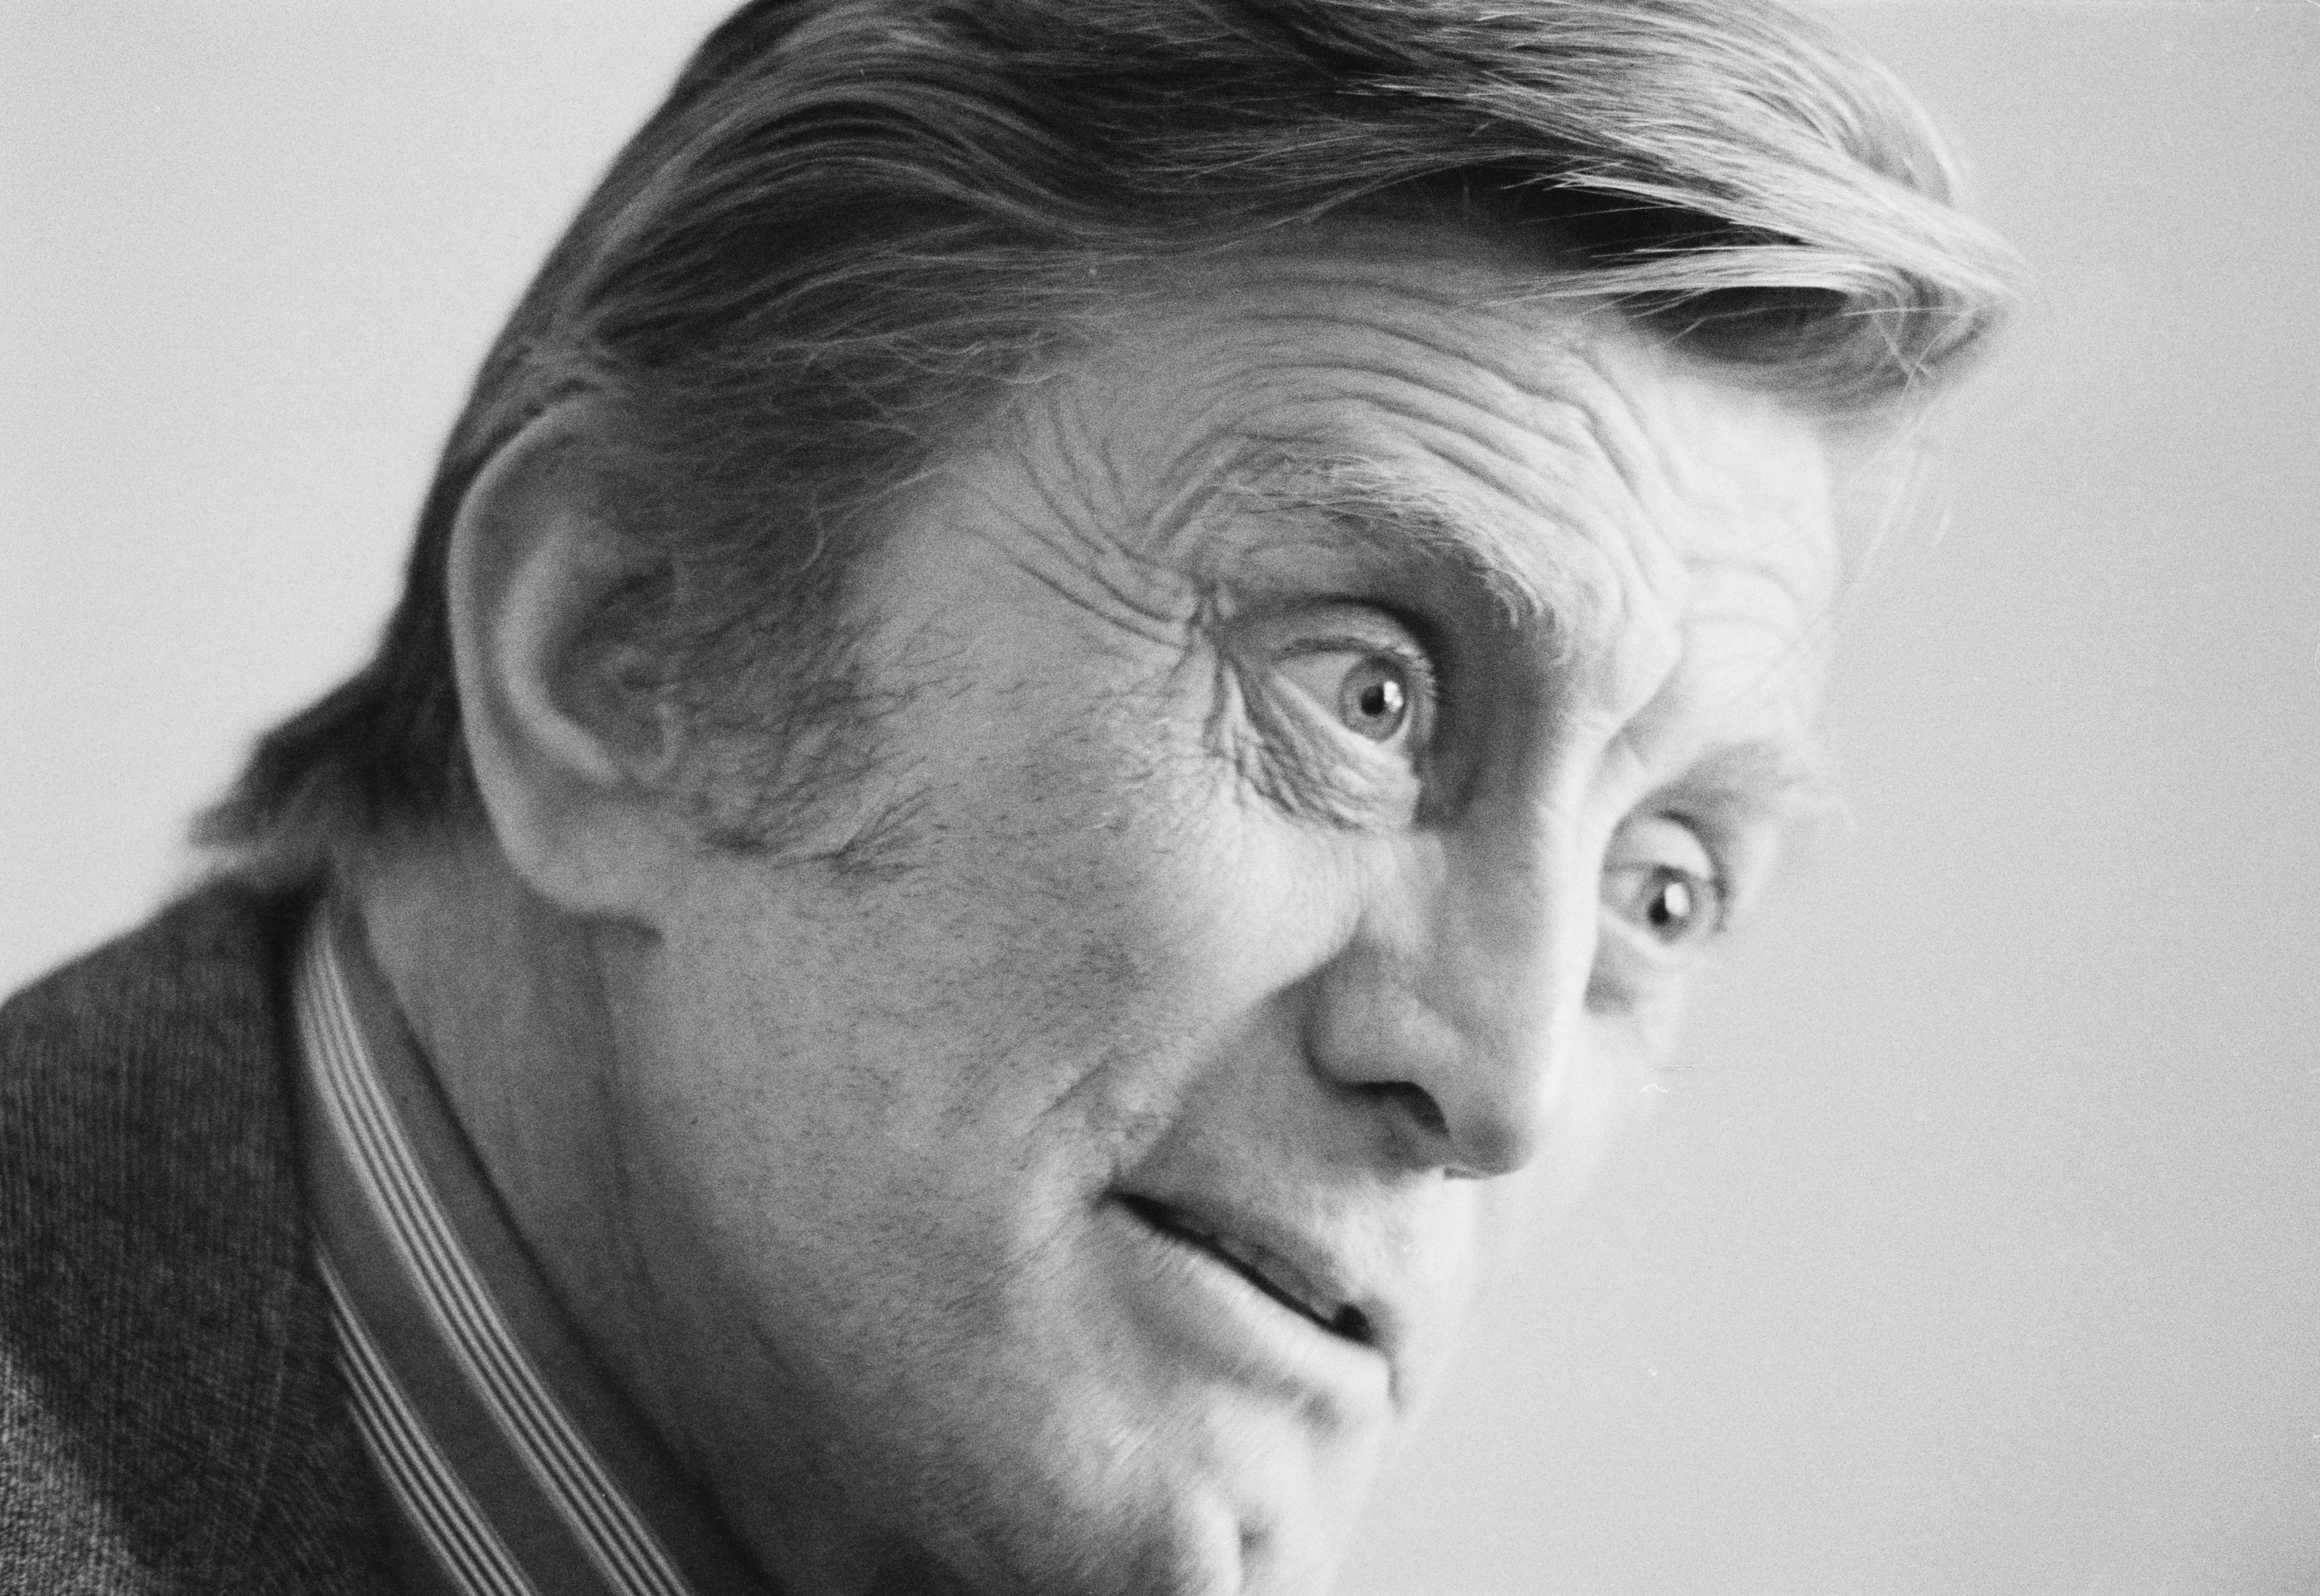 American actor, producer and film director Kirk Douglas in the UK on May 26,1977. | Source: Getty Images.